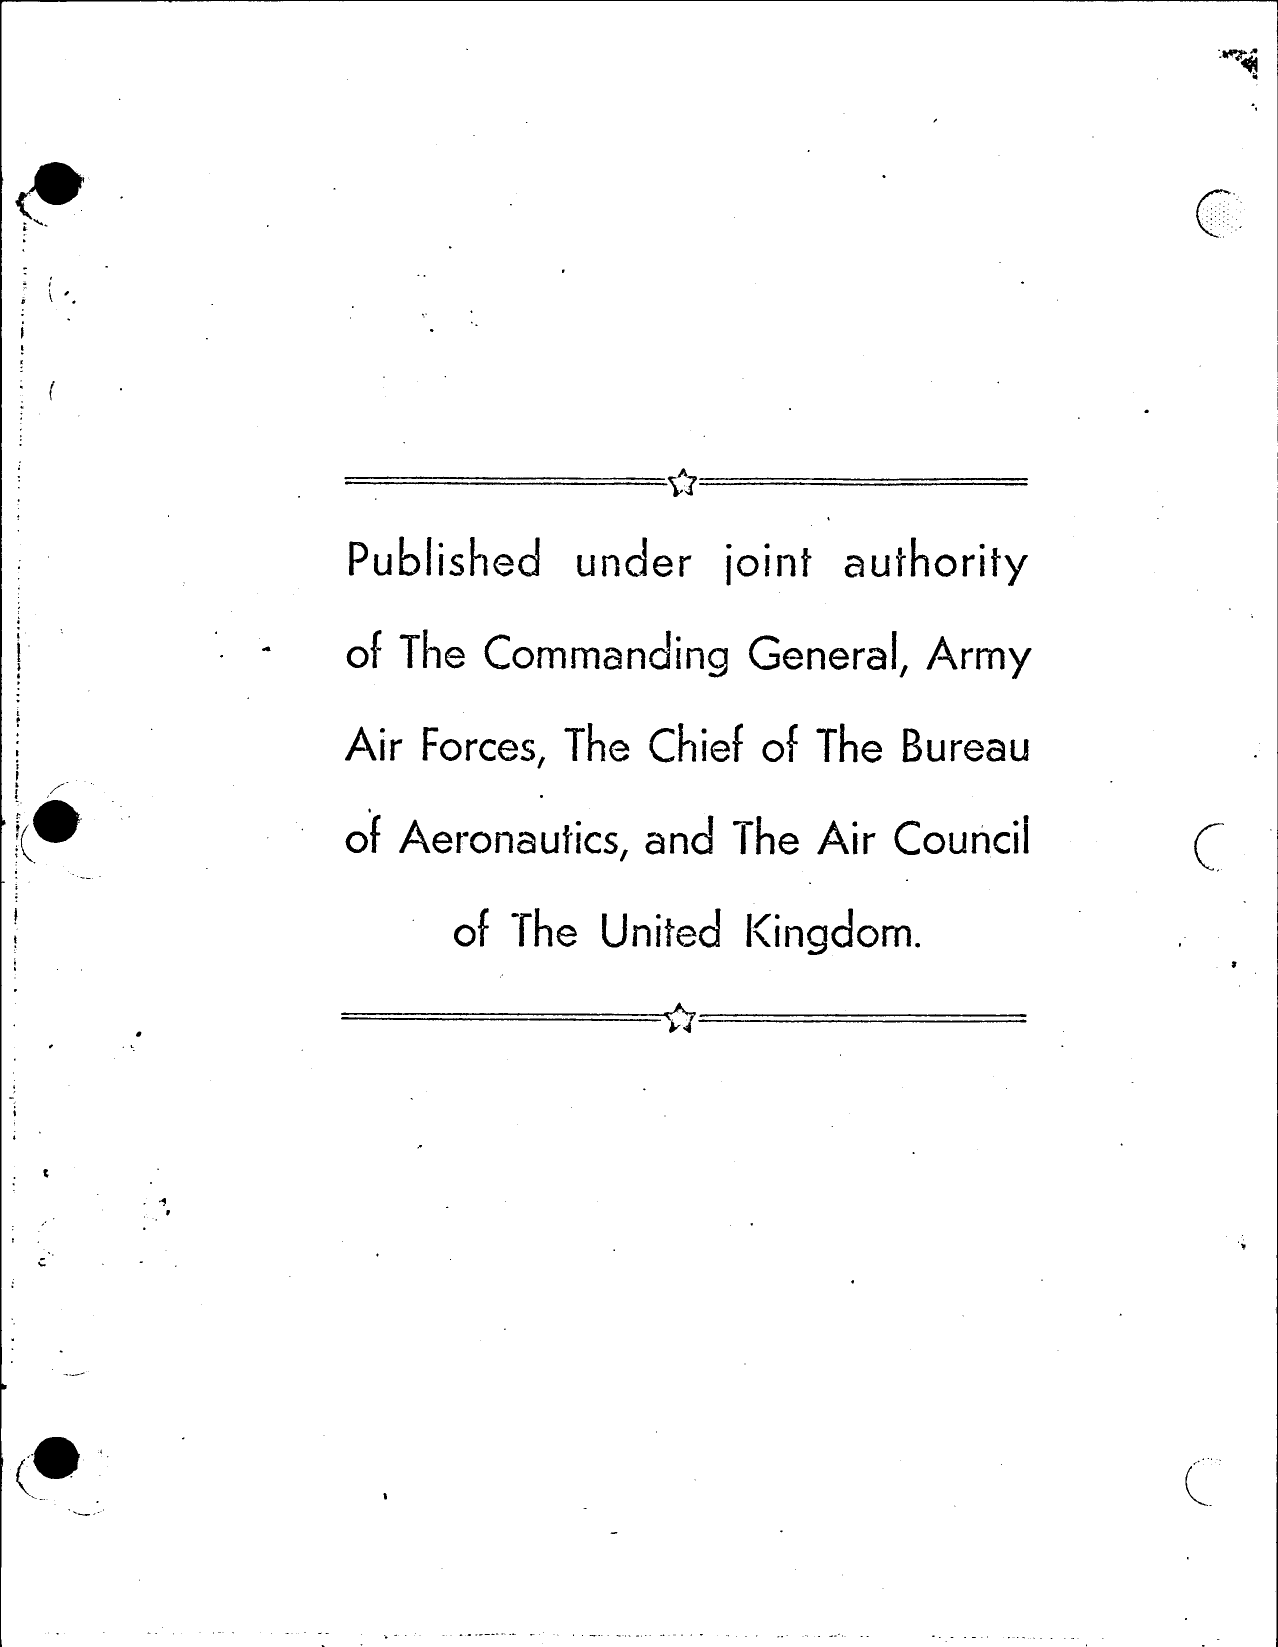 Sample page 2 from AirCorps Library document: Structural Repair - Grumman Goose - JRF-1, JRF-2, JRF-3, JRF-4, JRF-5, JRF-6B